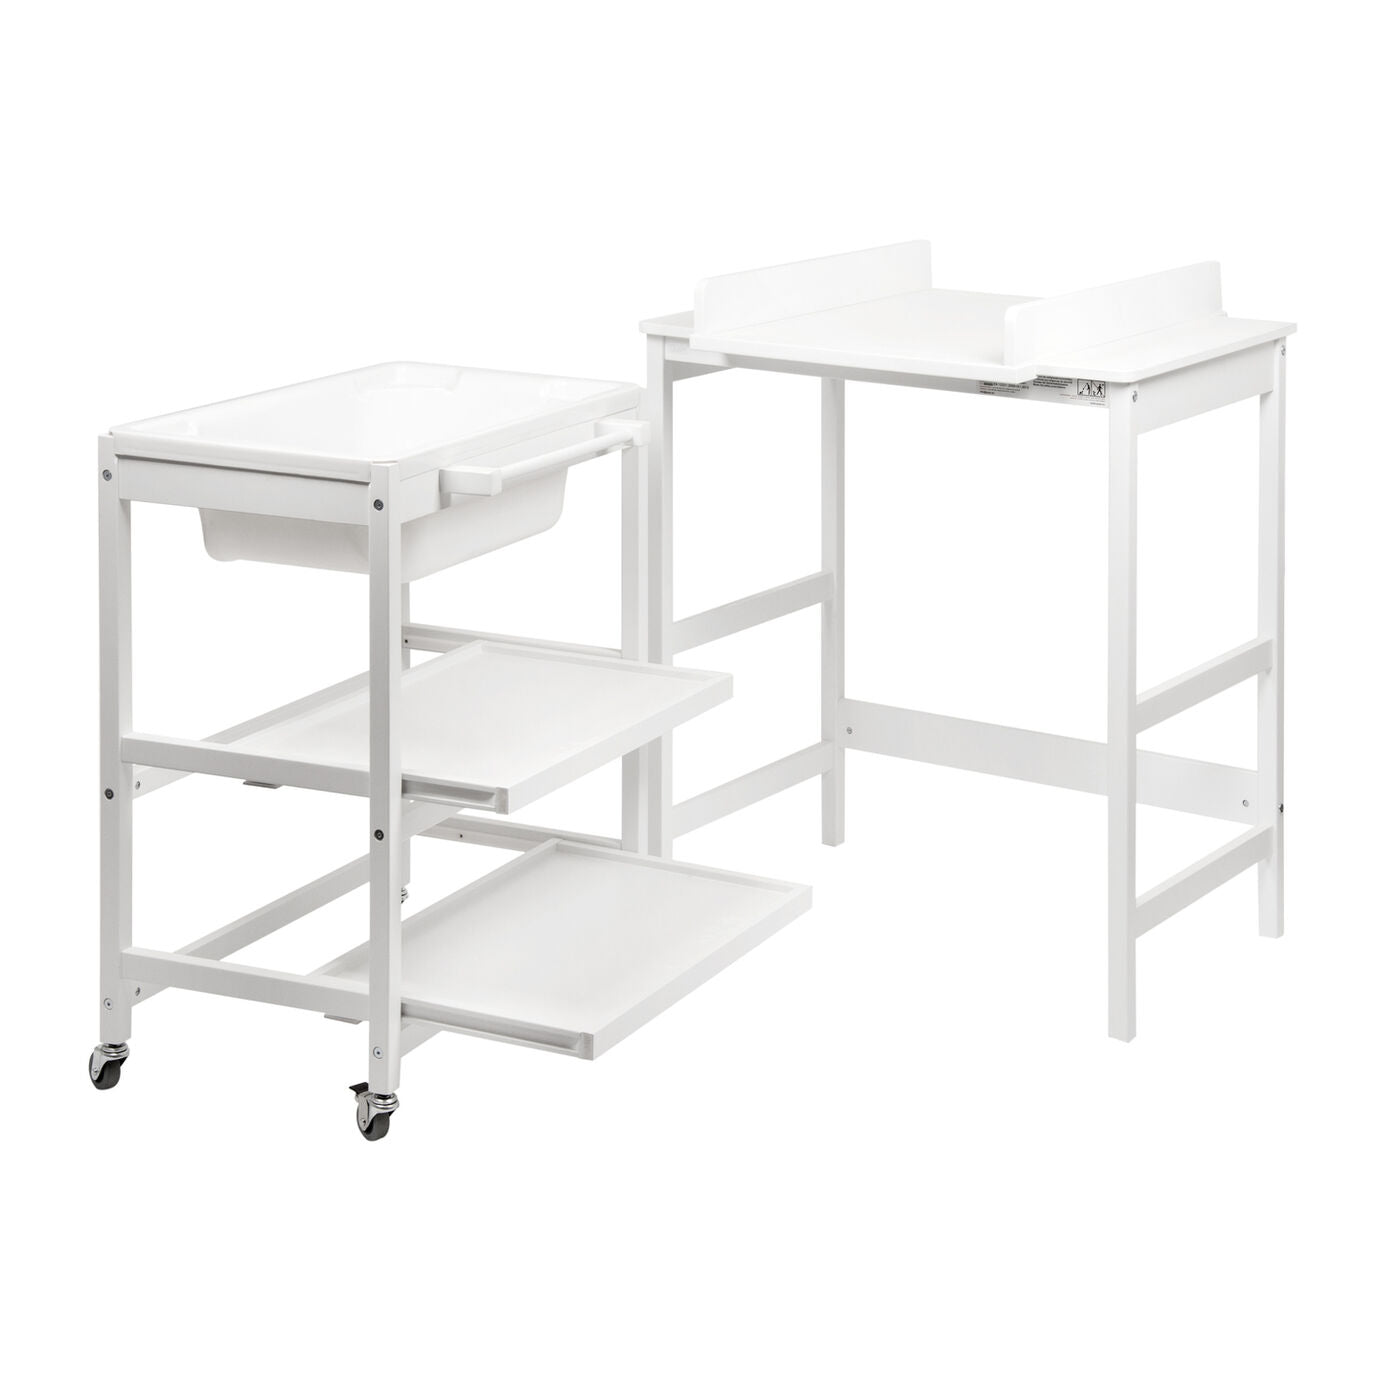 Quax Changing Table With Bath - Basic - White  - Hola BB